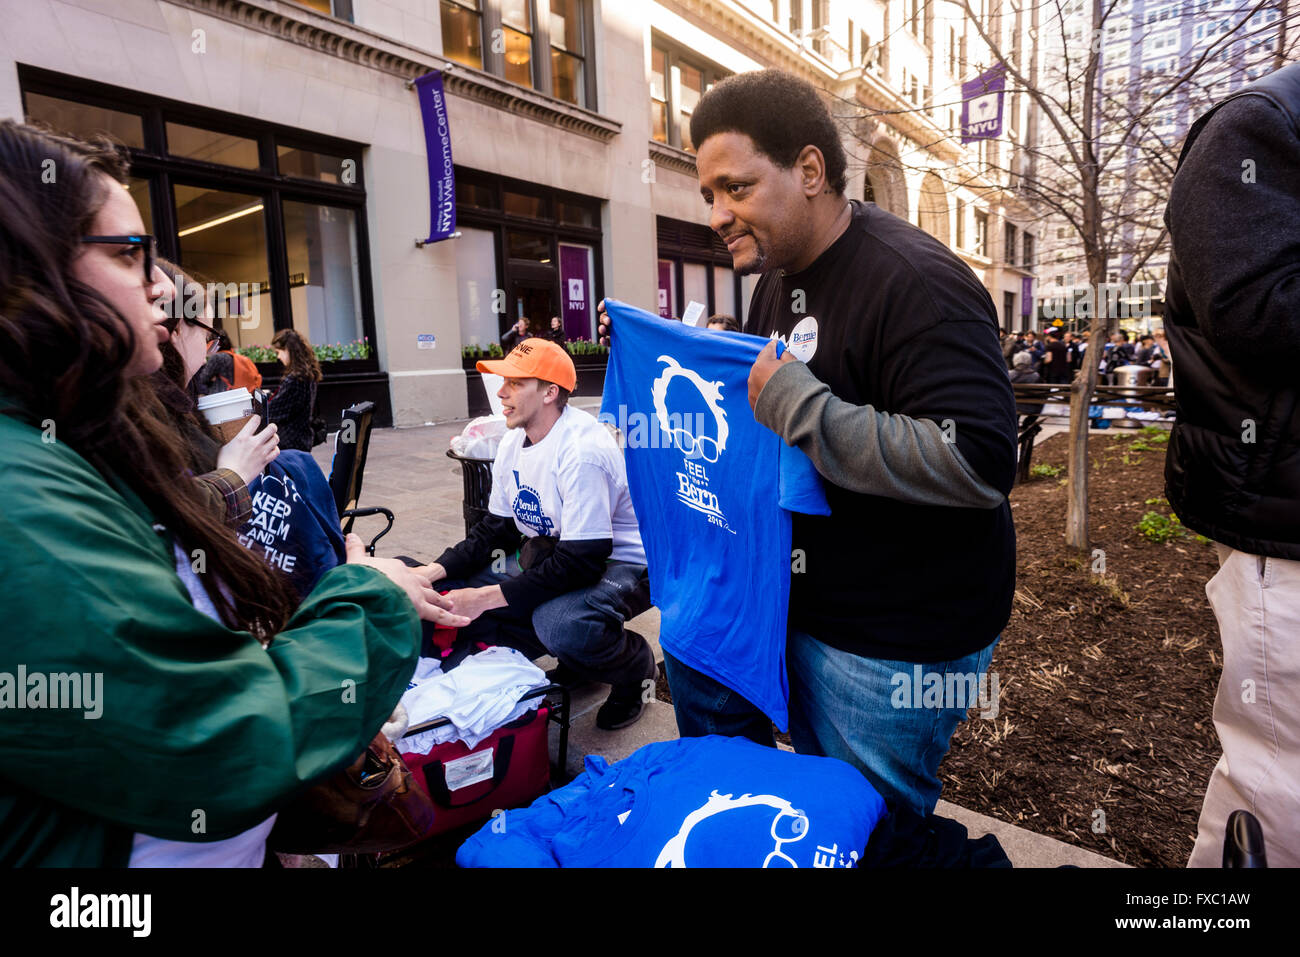 New York, USA. 13th April, 2016. Hours before a Bernie Sanders rally is scheduled to begin, supporters sell campaign buttons and t-shirts in Schwartz Plaza near Washington Square Park. Over 10,000 people are expected to attend the rally for the Democratic Presidential Candidate. Credit: Stacy Walsh Rosenstock/Alamy Live News Stock Photo